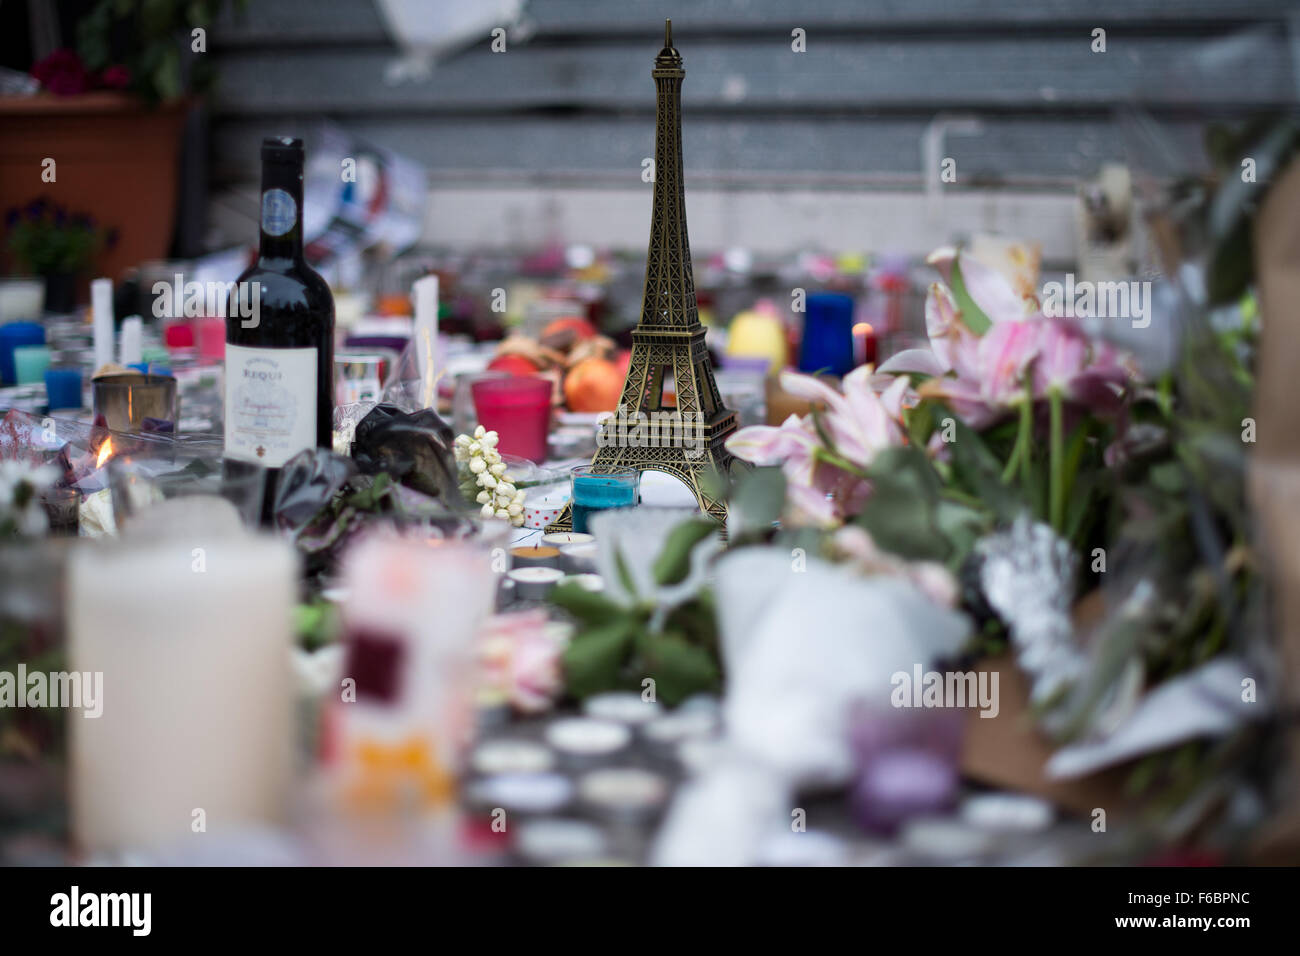 Paris, France. 16th Nov, 2015. A small Eiffel Tower stands among flowers and candles in front of the restaurant 'Le Petit Cambodge' in Paris, France, 16 November 2015. At least 129 people were killed during a series of overnight terror attacks in Paris from 13 to 14 November 2015. Photo: MARIUS BECKER/dpa (recrop)/dpa/Alamy Live News Stock Photo